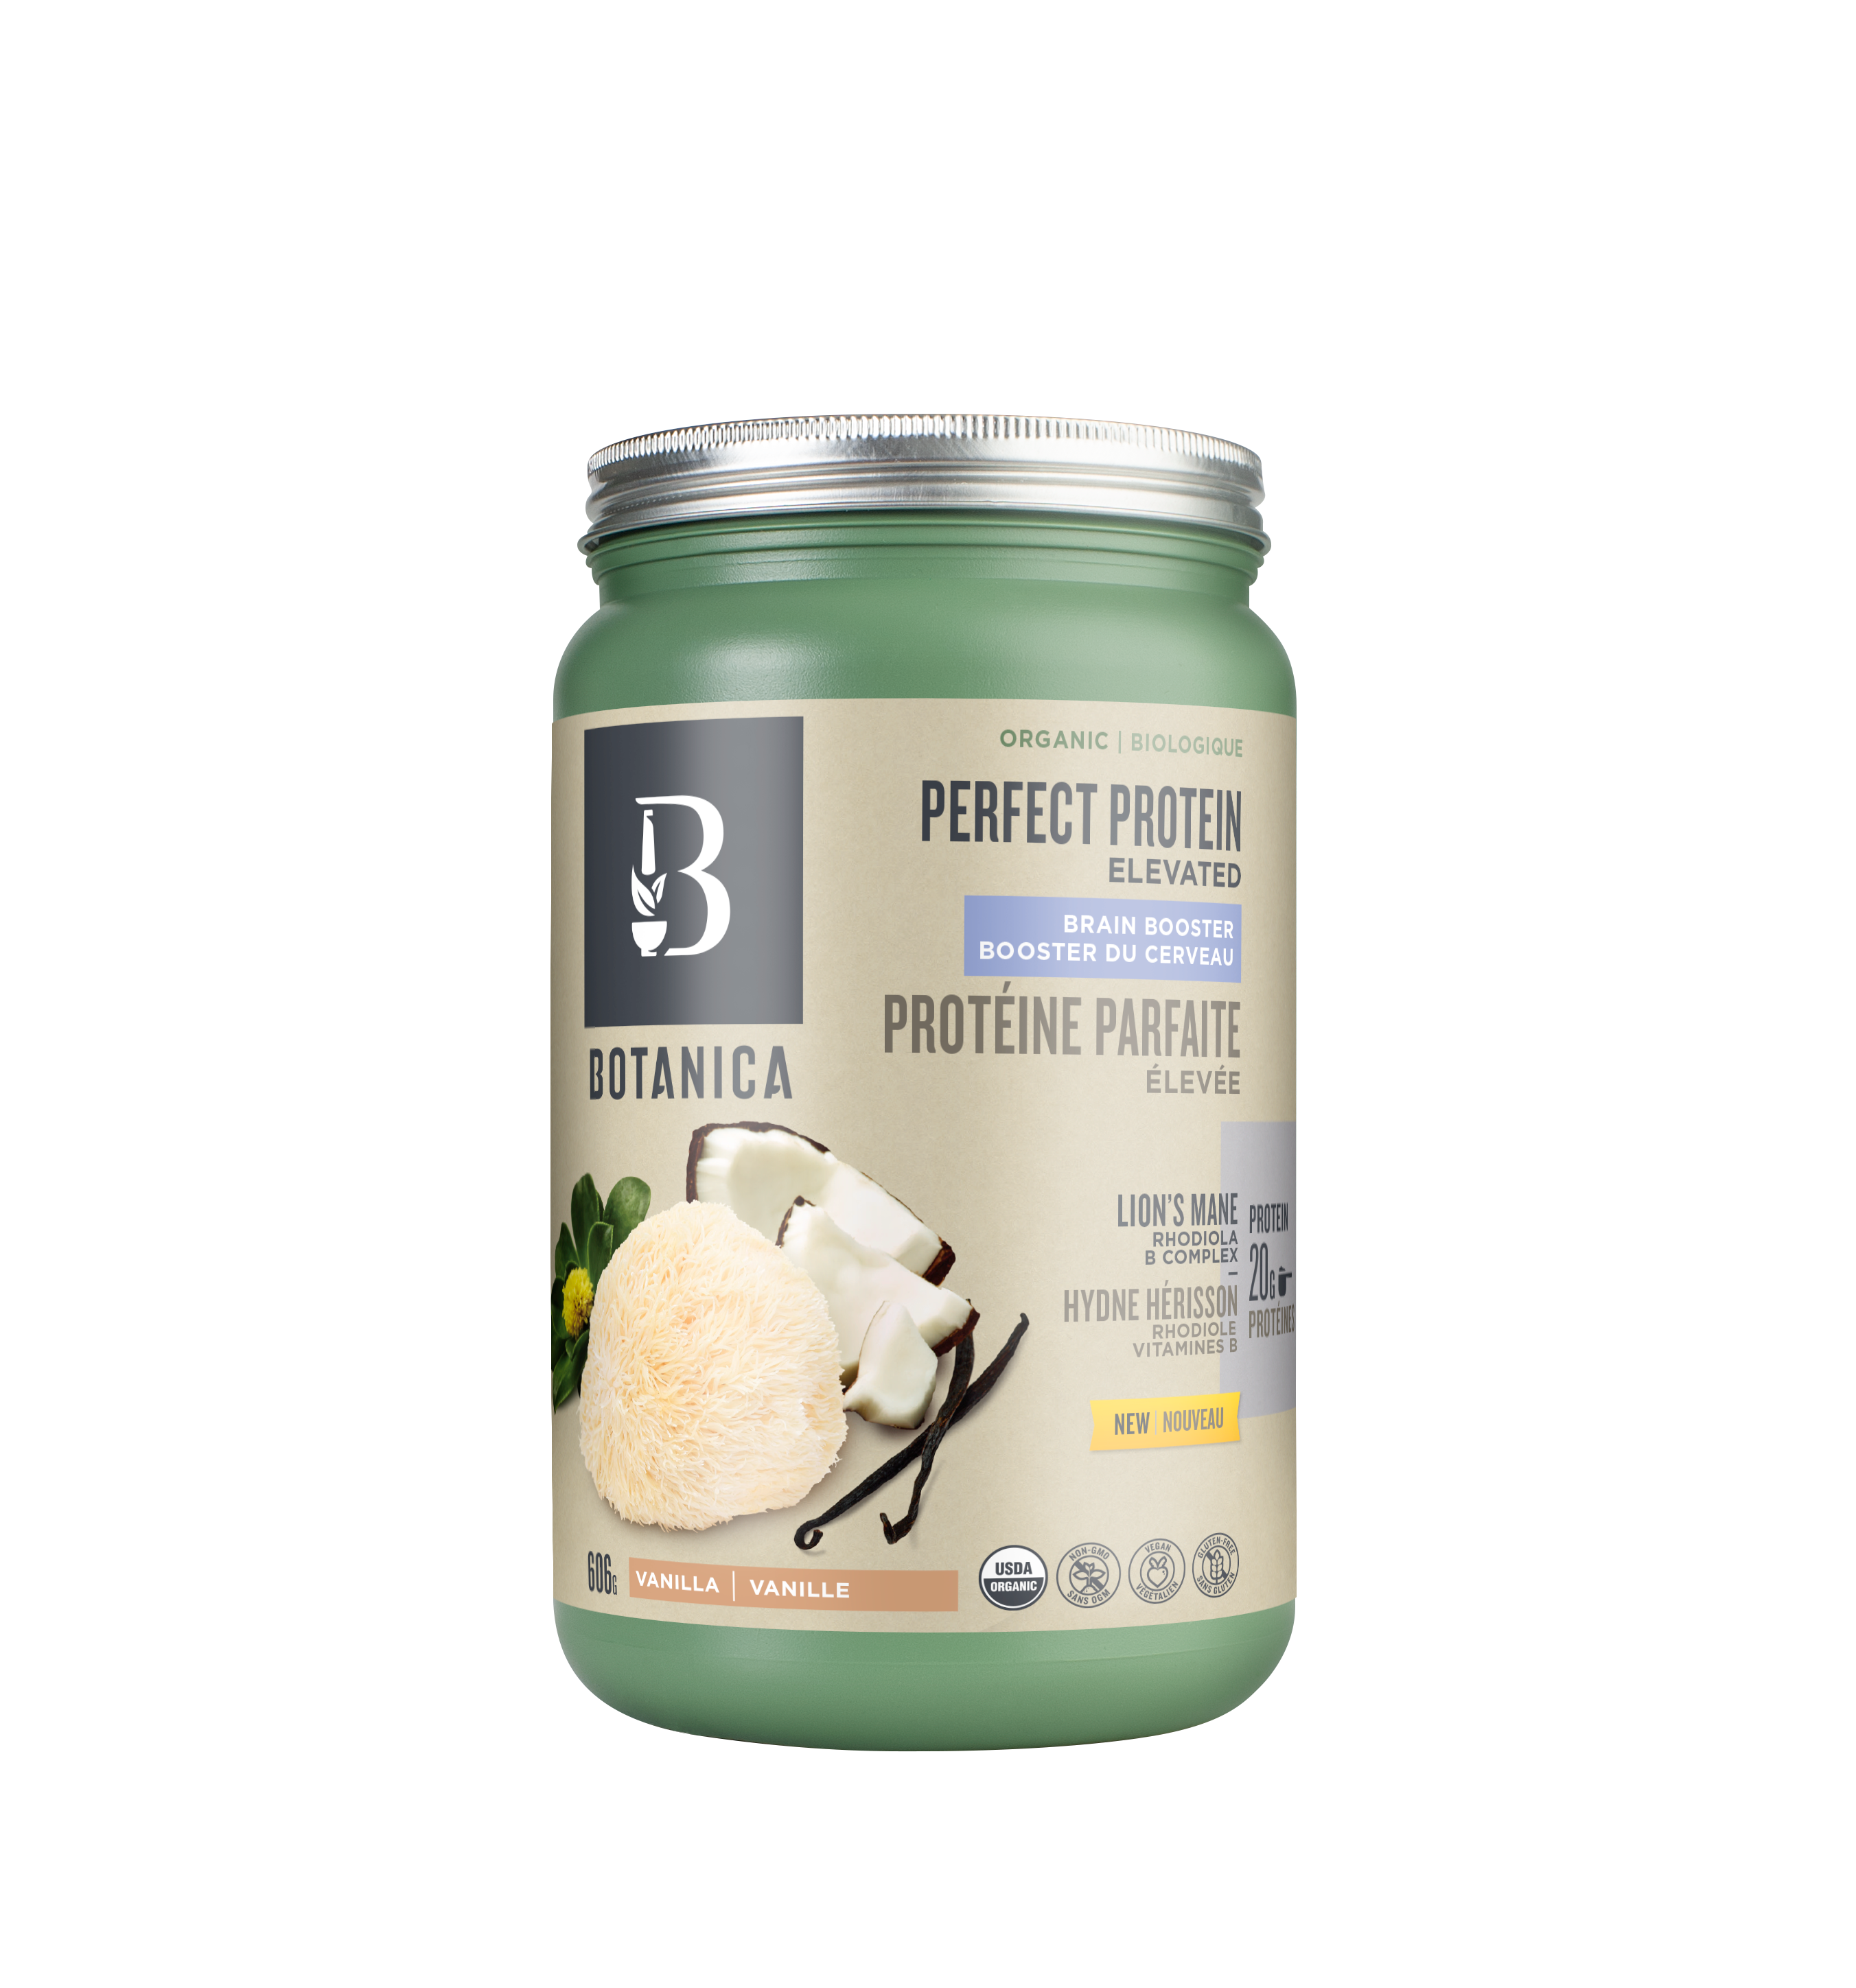 Botanica Perfect Protein Elevated